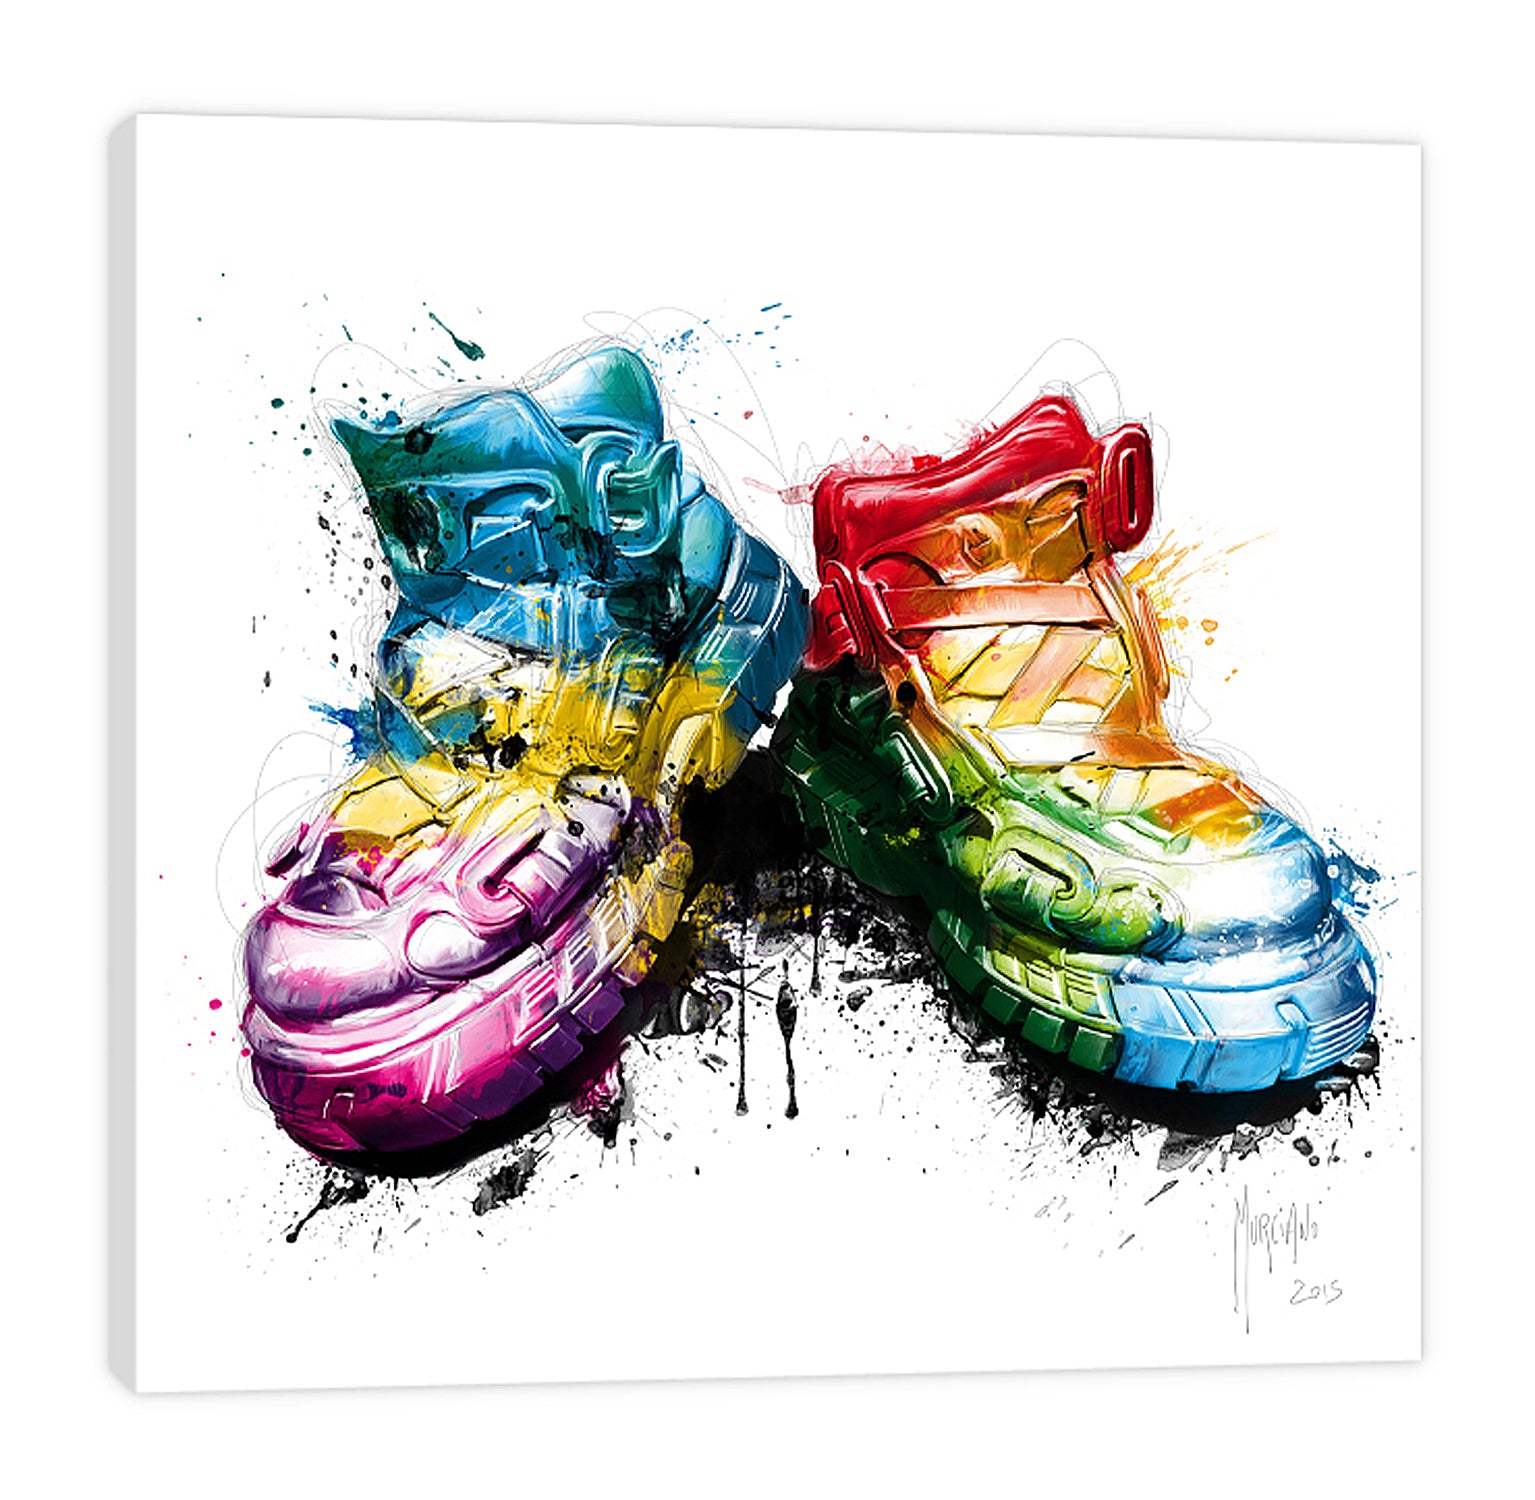 Patrice-Murciano,Modern & Contemporary,Entertainment,my shoes,shoes,shoe,fashion,colorful,ombre,splatters,paint drips,Red,Mist Gray,Charcoal Gray,Tan White,Gray